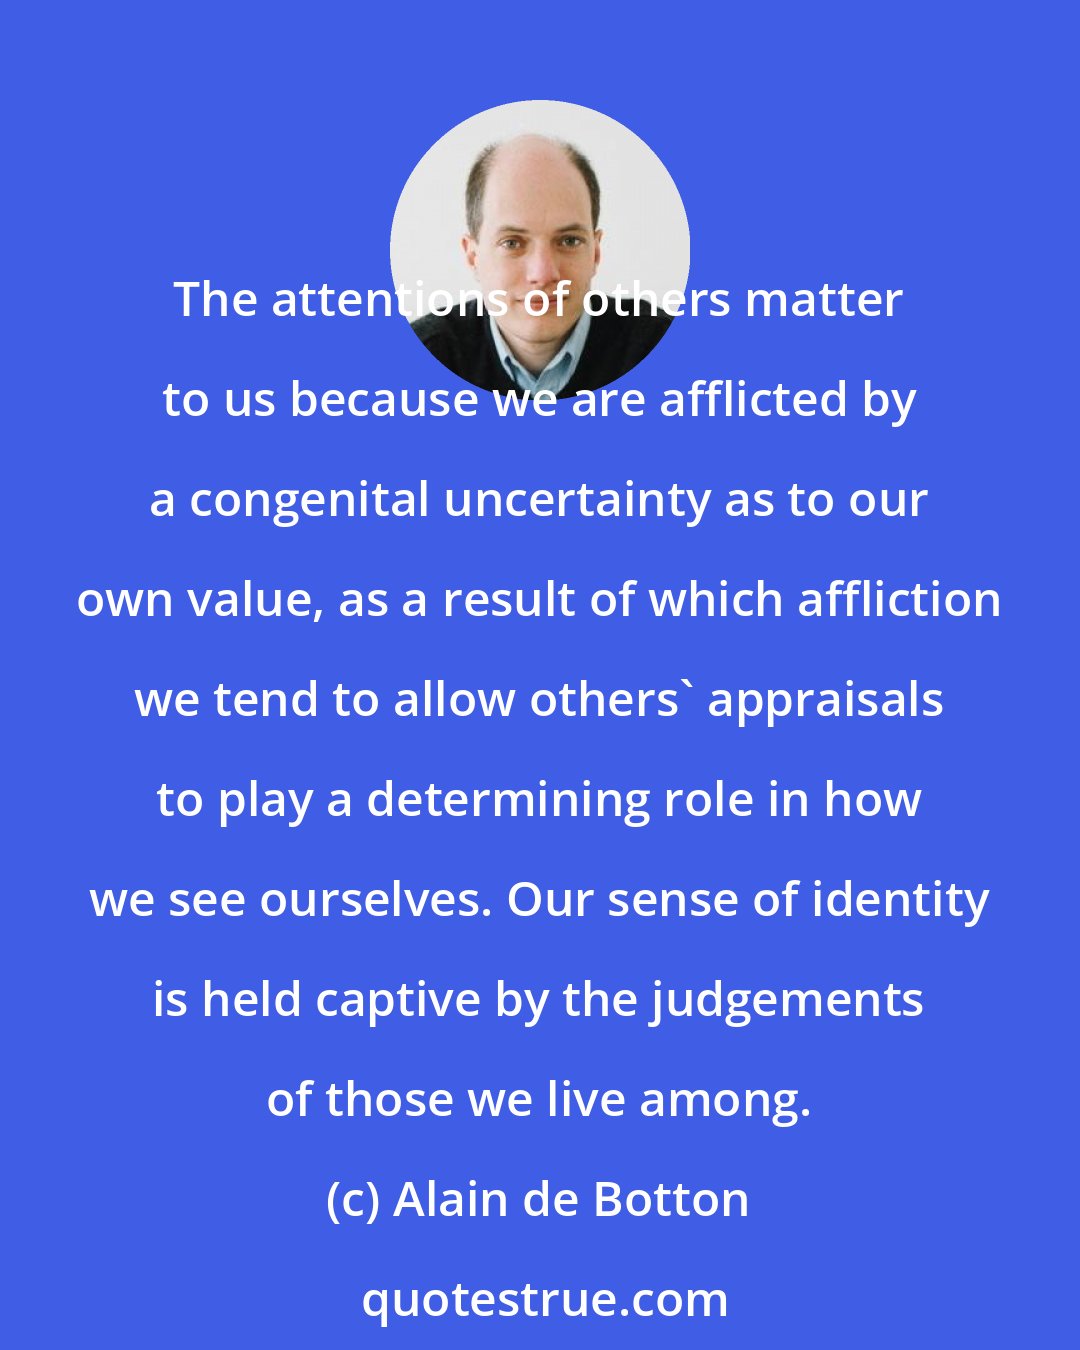 Alain de Botton: The attentions of others matter to us because we are afflicted by a congenital uncertainty as to our own value, as a result of which affliction we tend to allow others' appraisals to play a determining role in how we see ourselves. Our sense of identity is held captive by the judgements of those we live among.